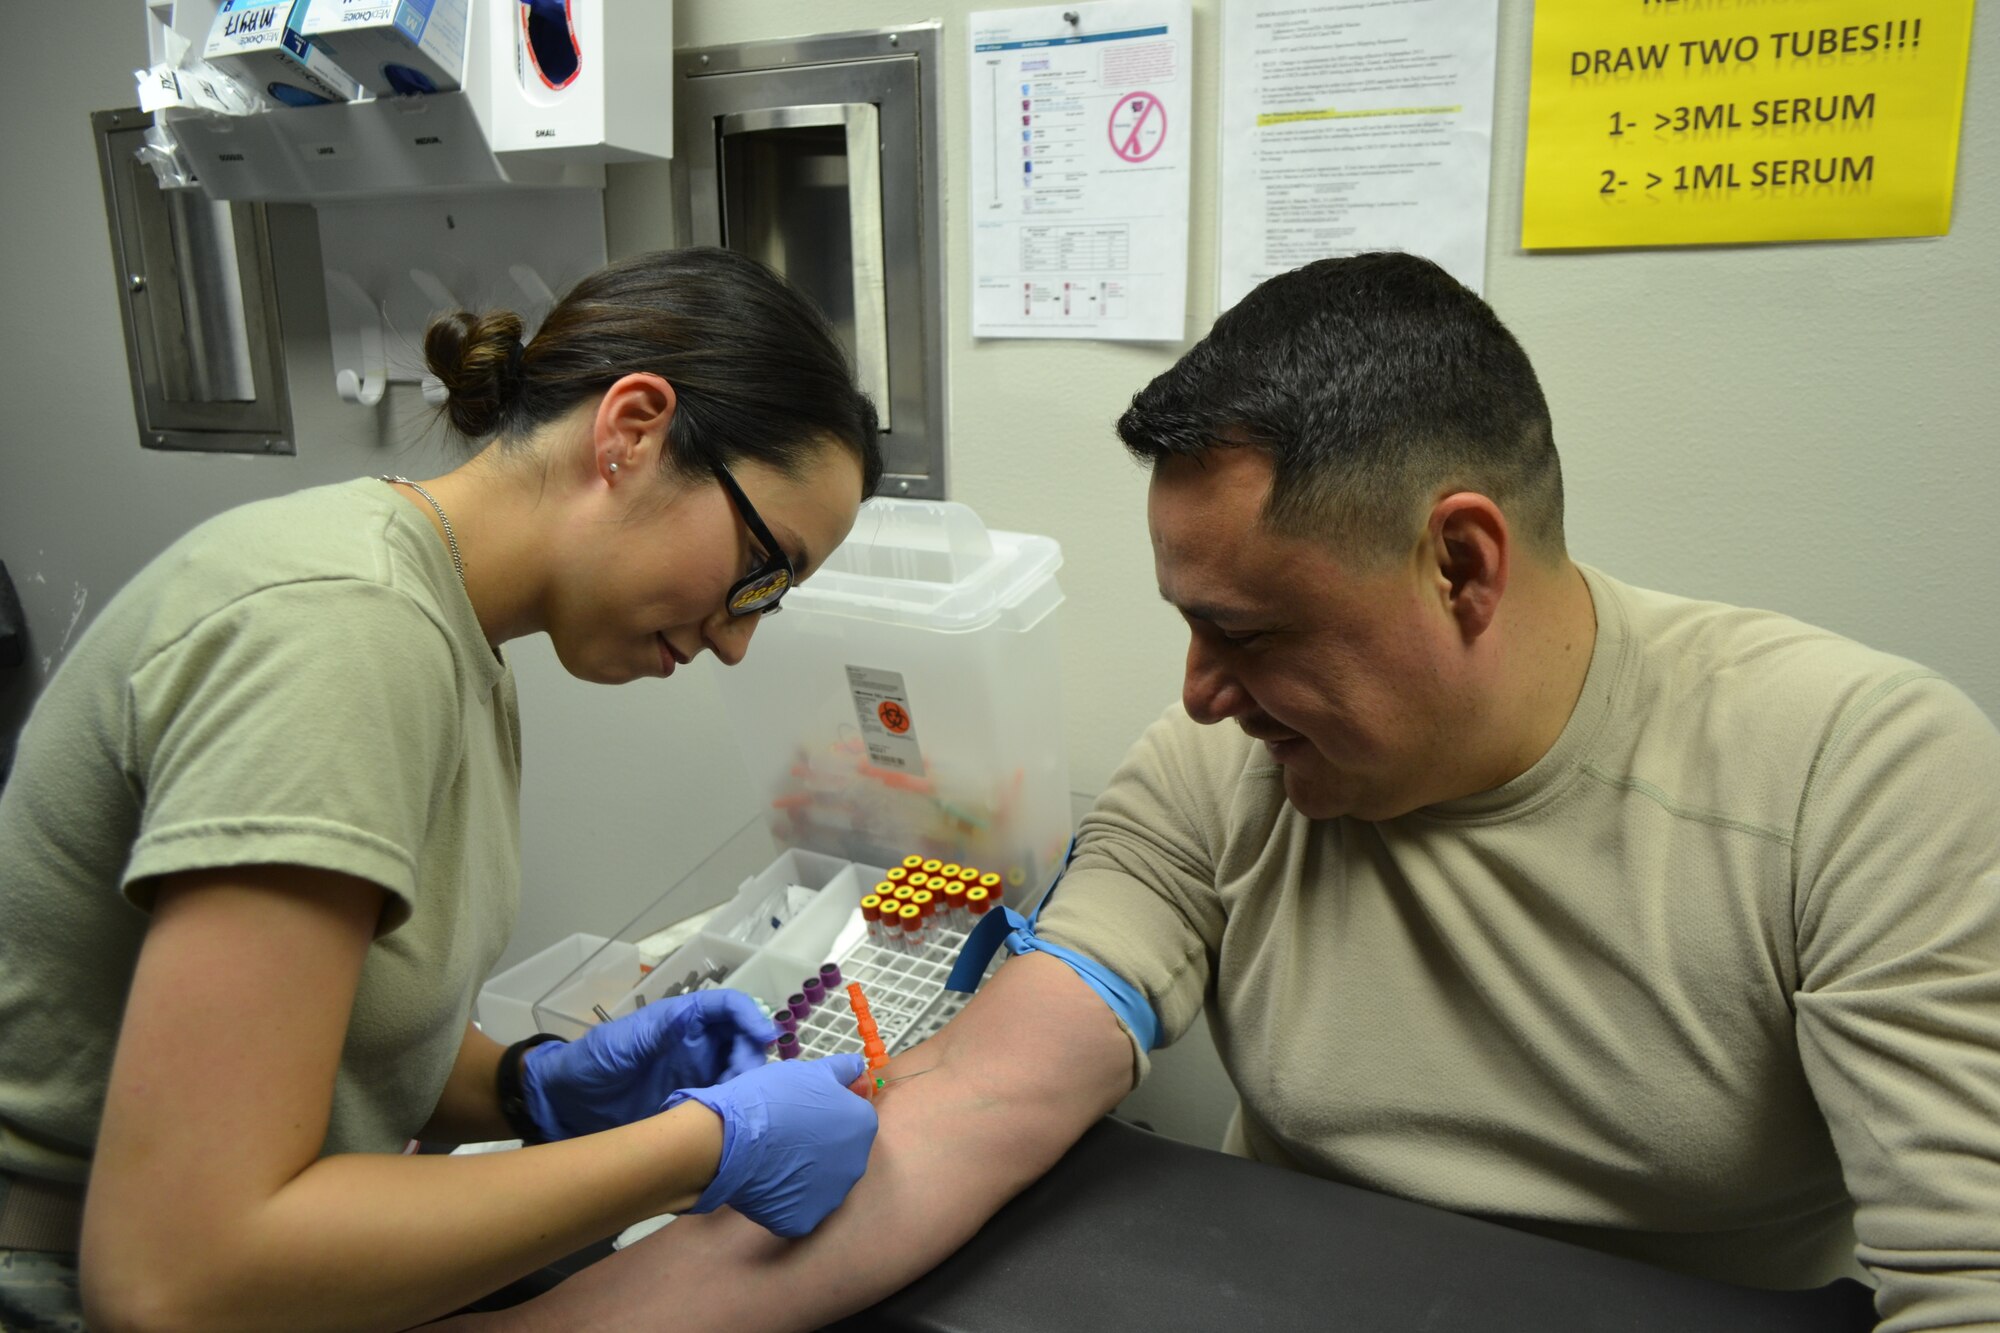 Senior Airman Anissa Testaverde, a 147th Medical Group, medical technician, accomplishes a blood draw for Senior Airman Felipe Sanchez, a Response Force Leader with the 147th Security Forces Squadron on April 2, 2016 at Ellington Field Joint Reserve Base. Sanchez is getting his blood drawn at the medical group as part of individual readiness requirements.